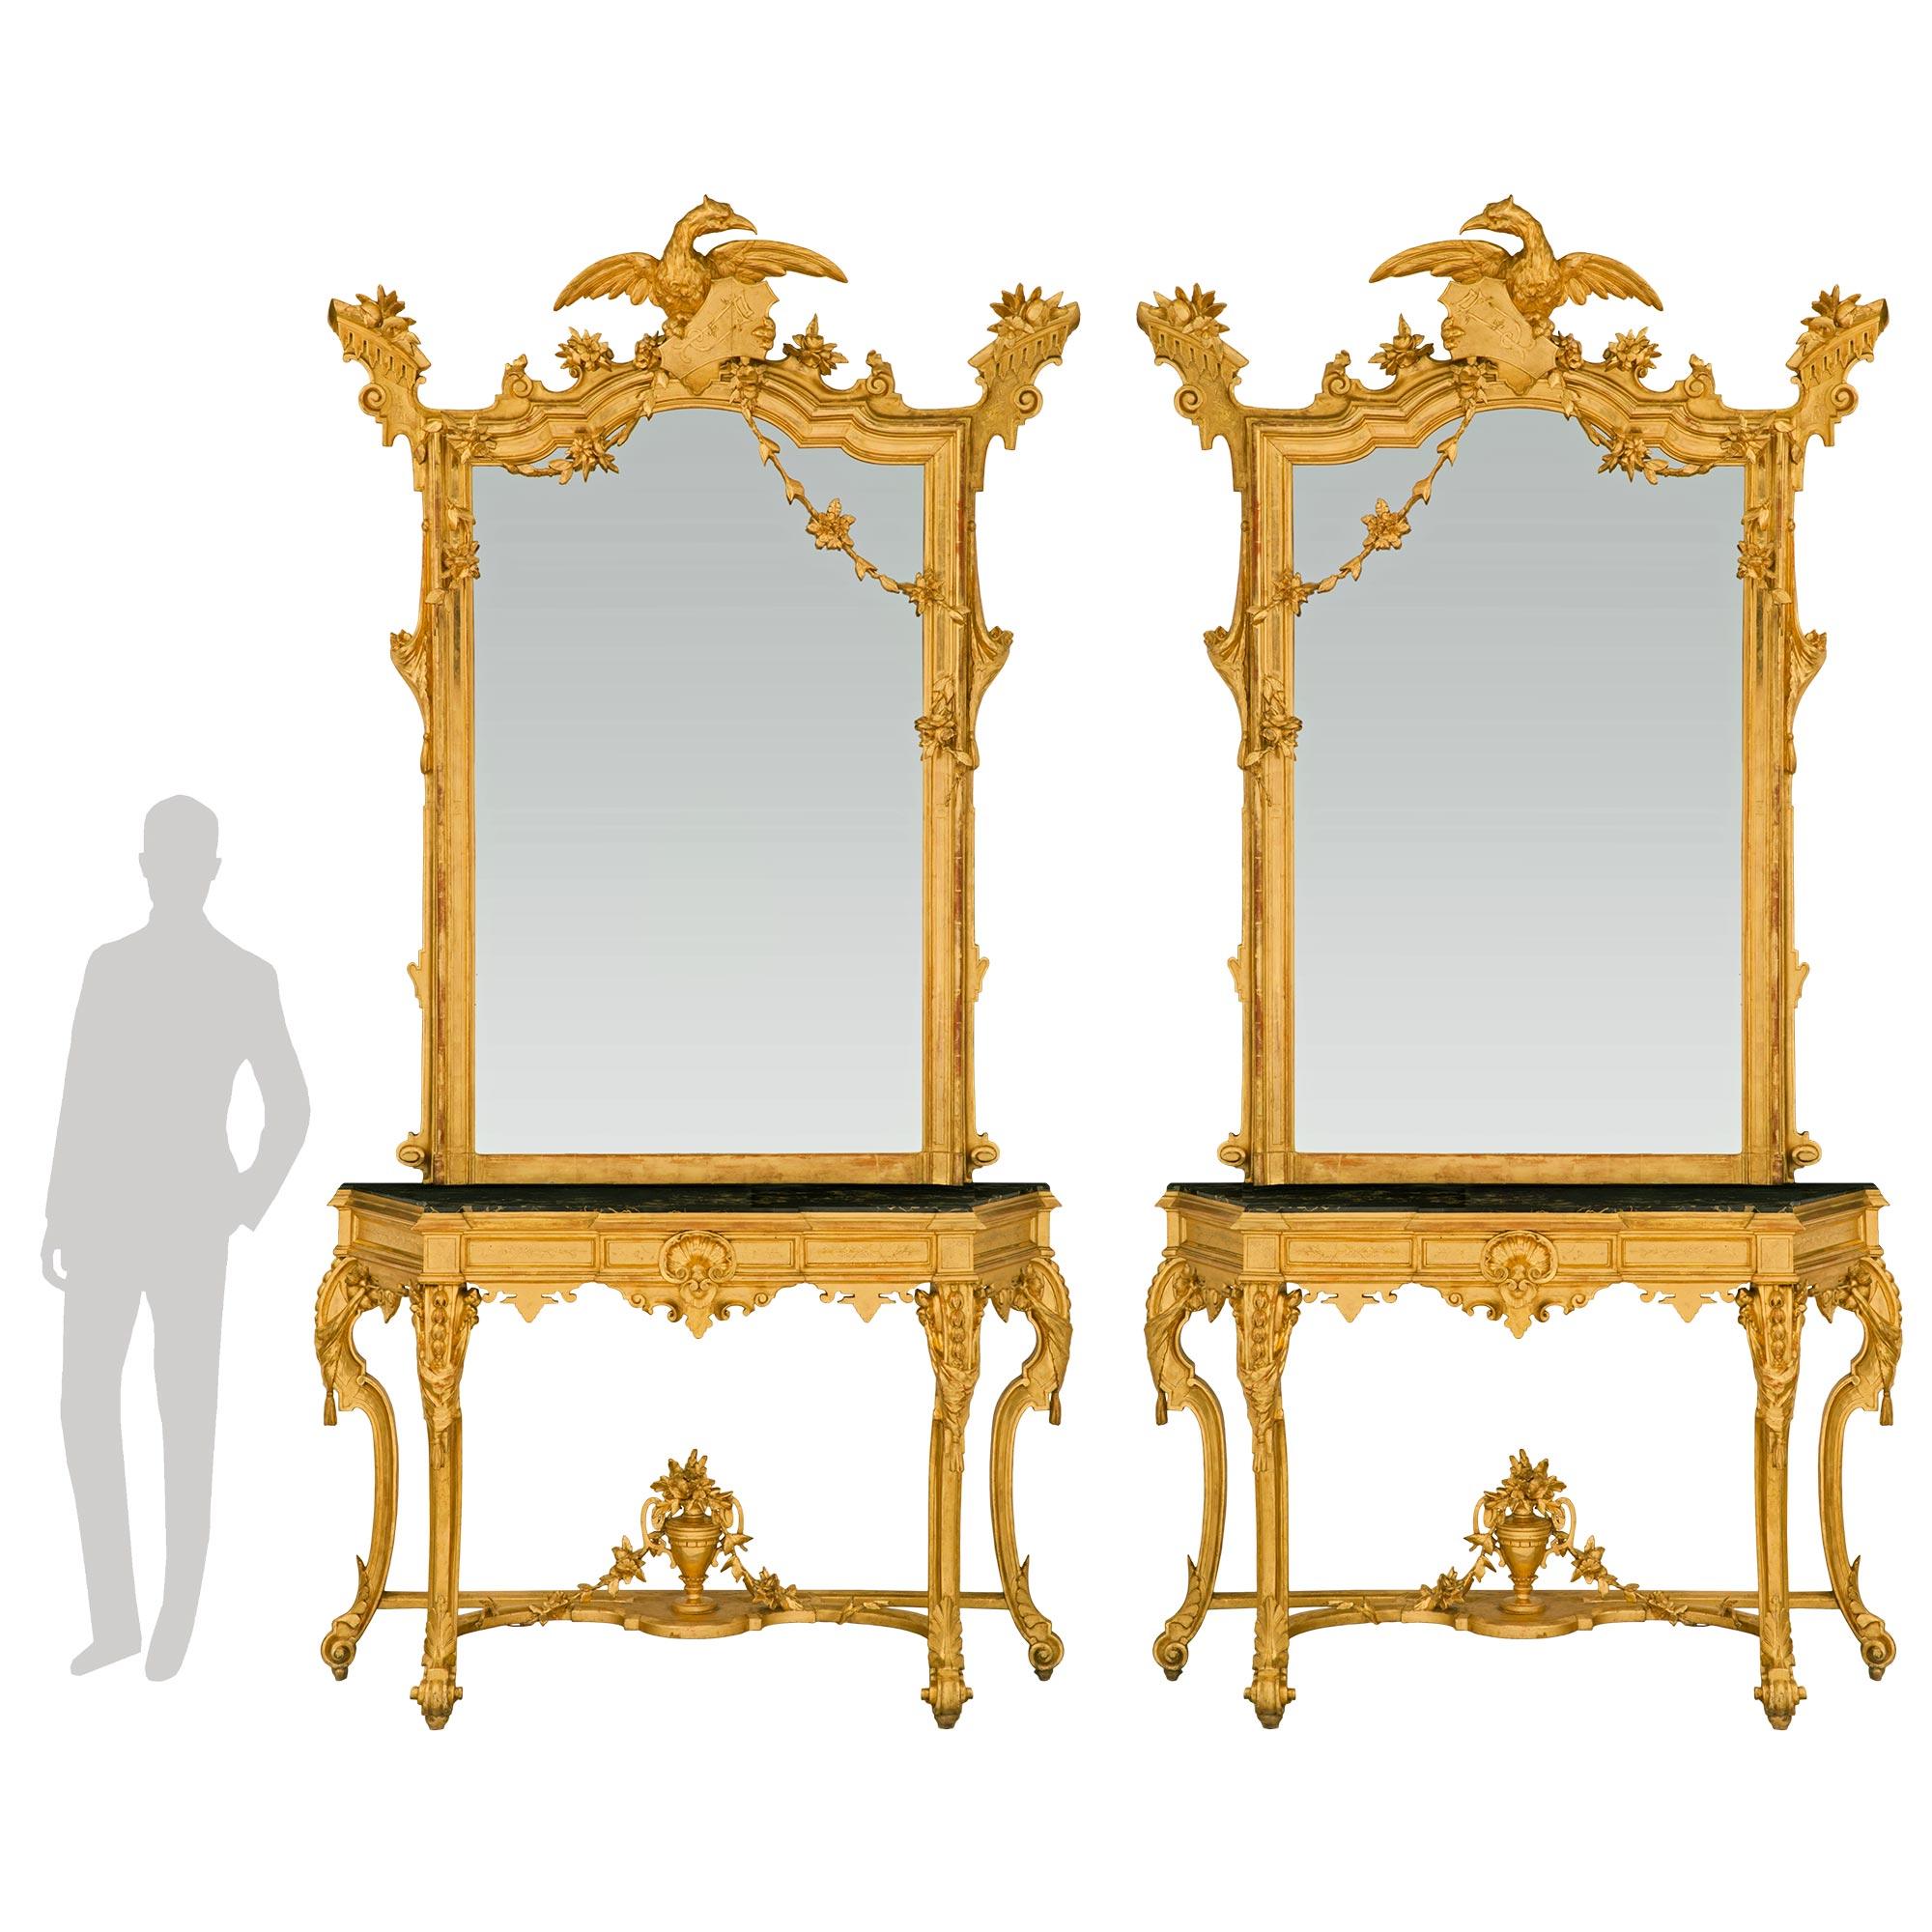 A spectacular and very high quality pair of Italian 19th century neo-classical st. giltwood consoles and matching mirrors. Each important freestanding console is raised by elegantly scrolled legs with beautiful foliate feet and striking swaging